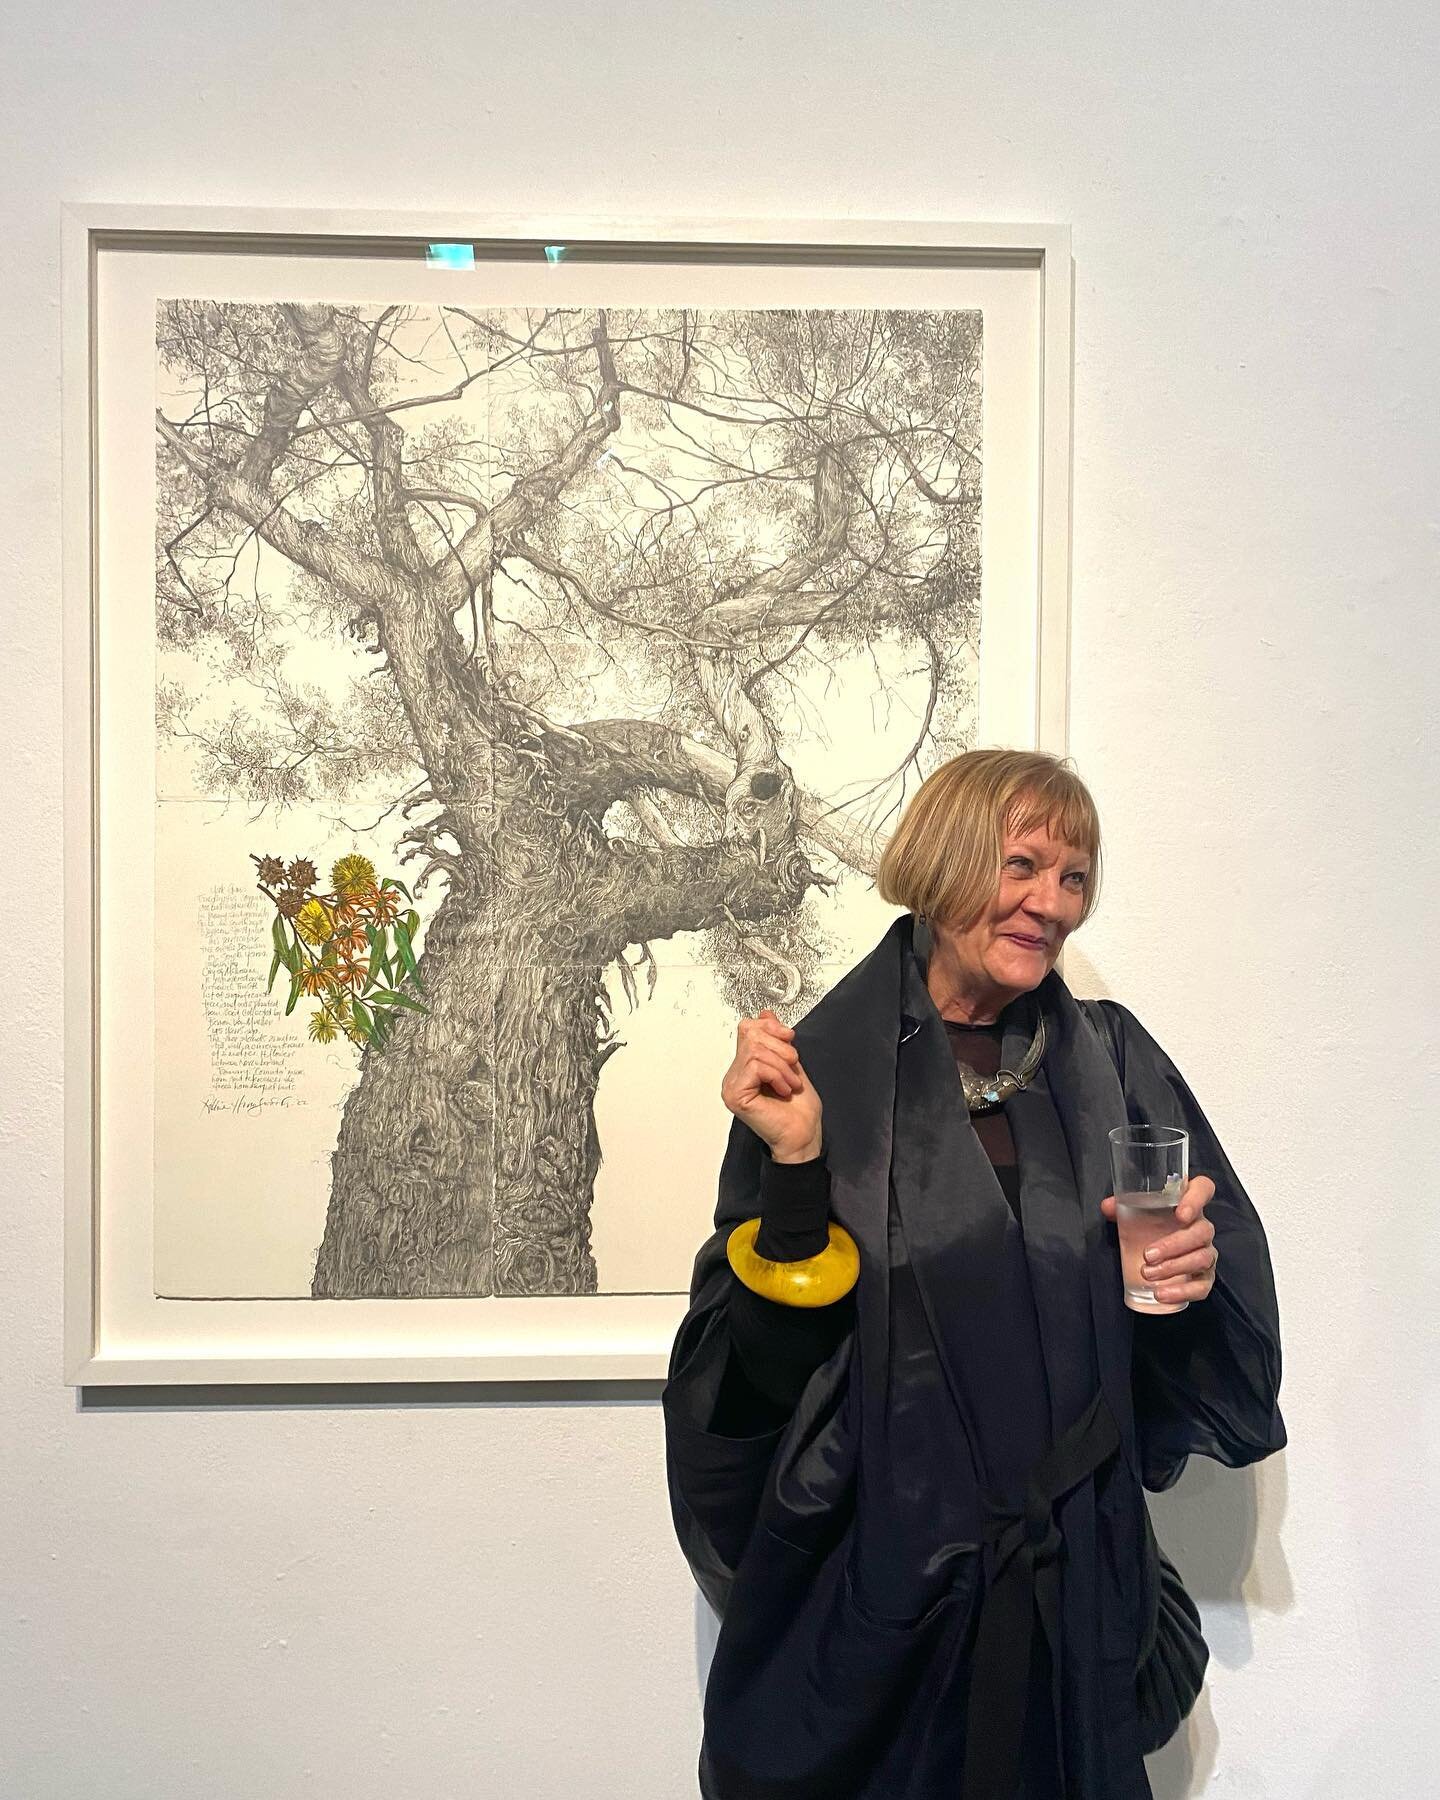 Opening of &lsquo;Tree&rsquo; exhibition at &lsquo;45  Downstairs&rsquo;.
Amazing initiative of @climarteaus @__jolane__ @fortyfivedownstairs
This is me trying to look nonchalant in from of my drawing of the Yate tree @cityofmelbourne  #climateaction